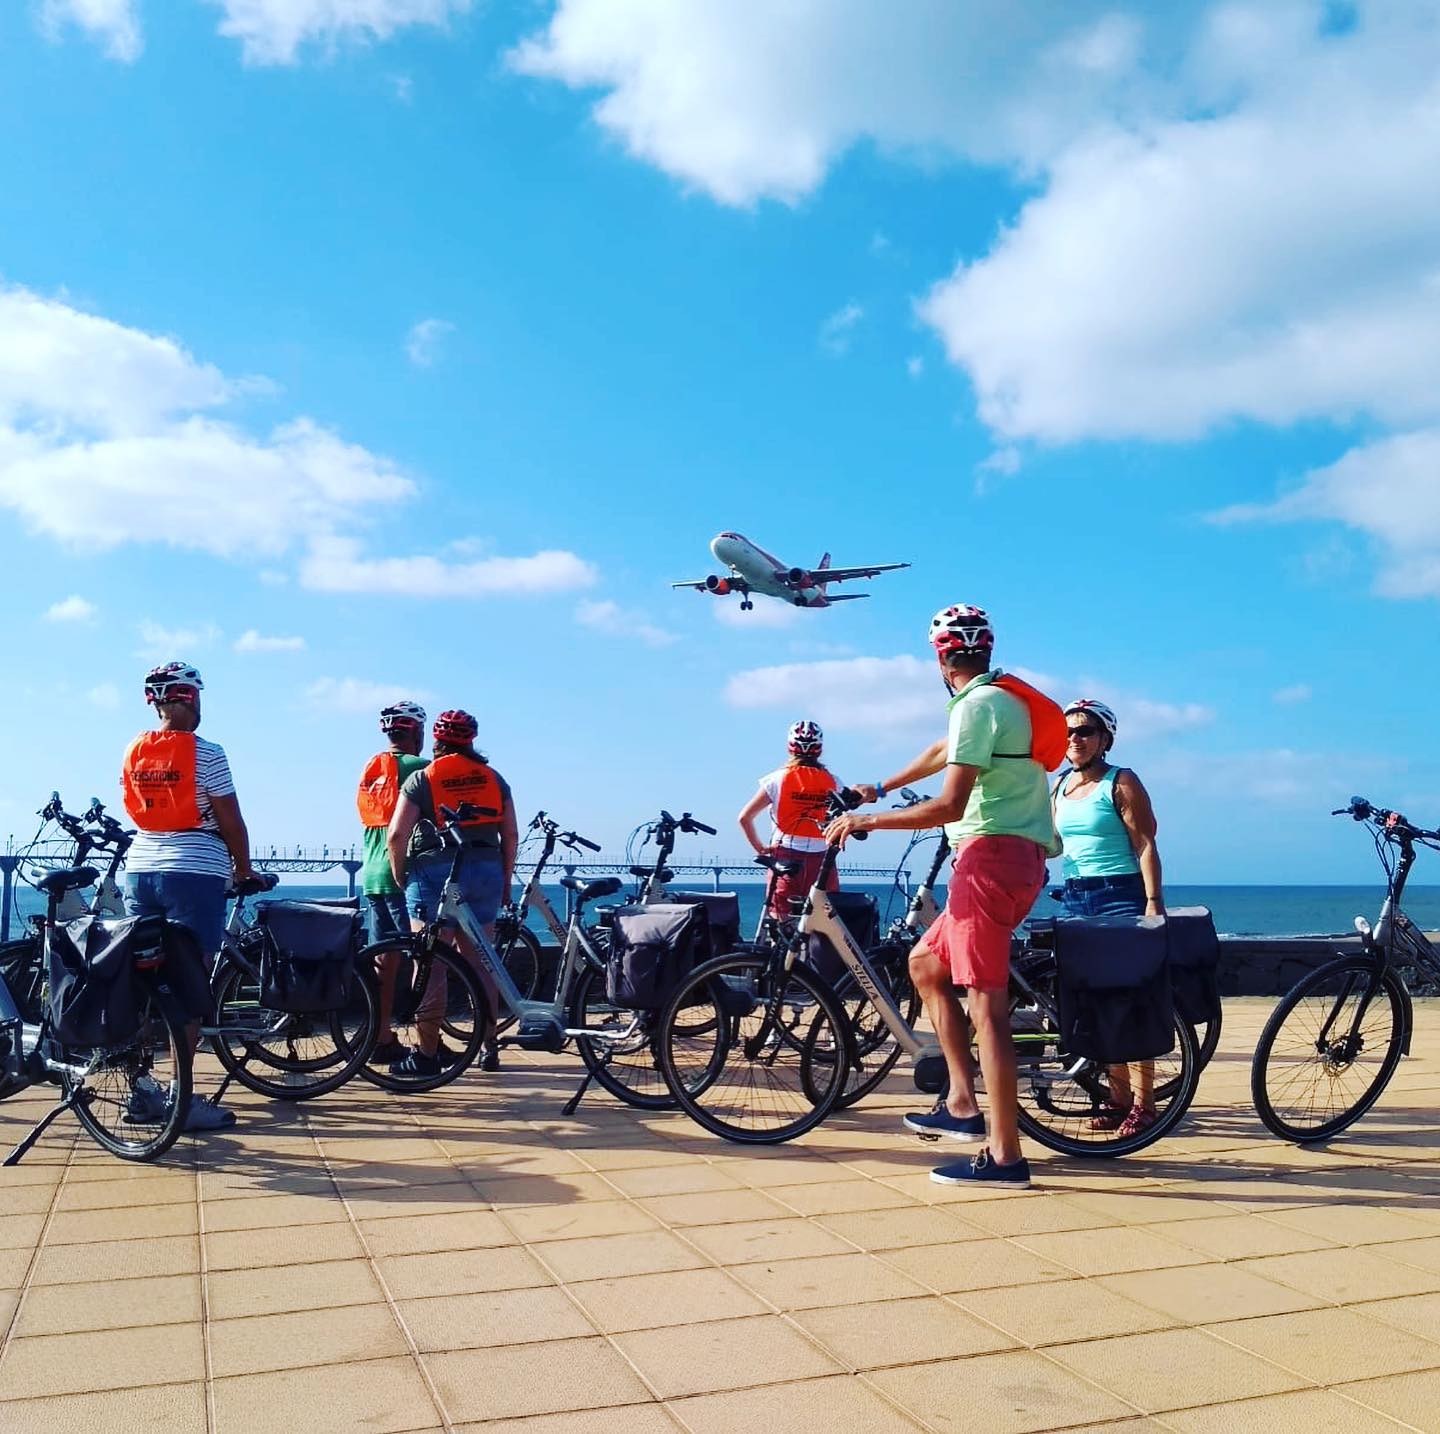 e-Bikes and plane watching in Lanzarote